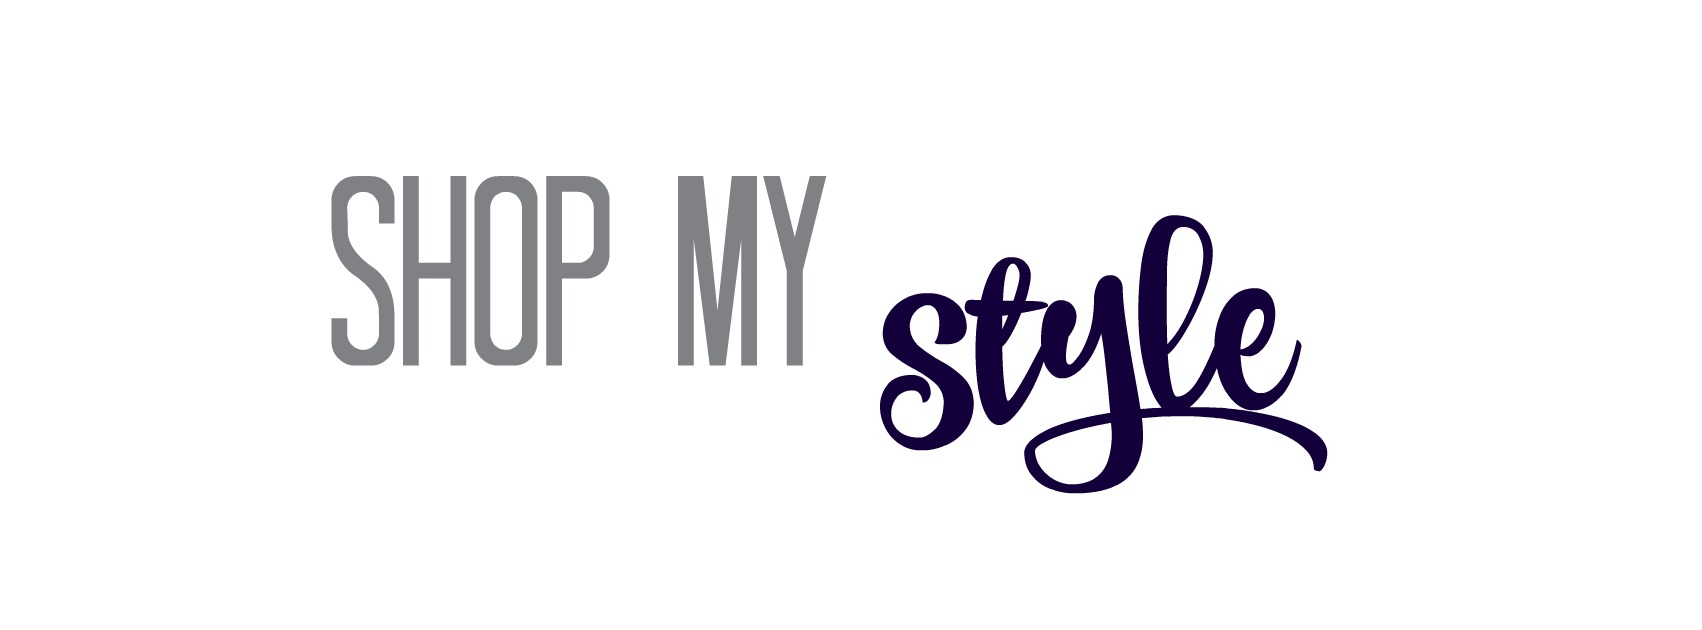 Shop my style cover photo